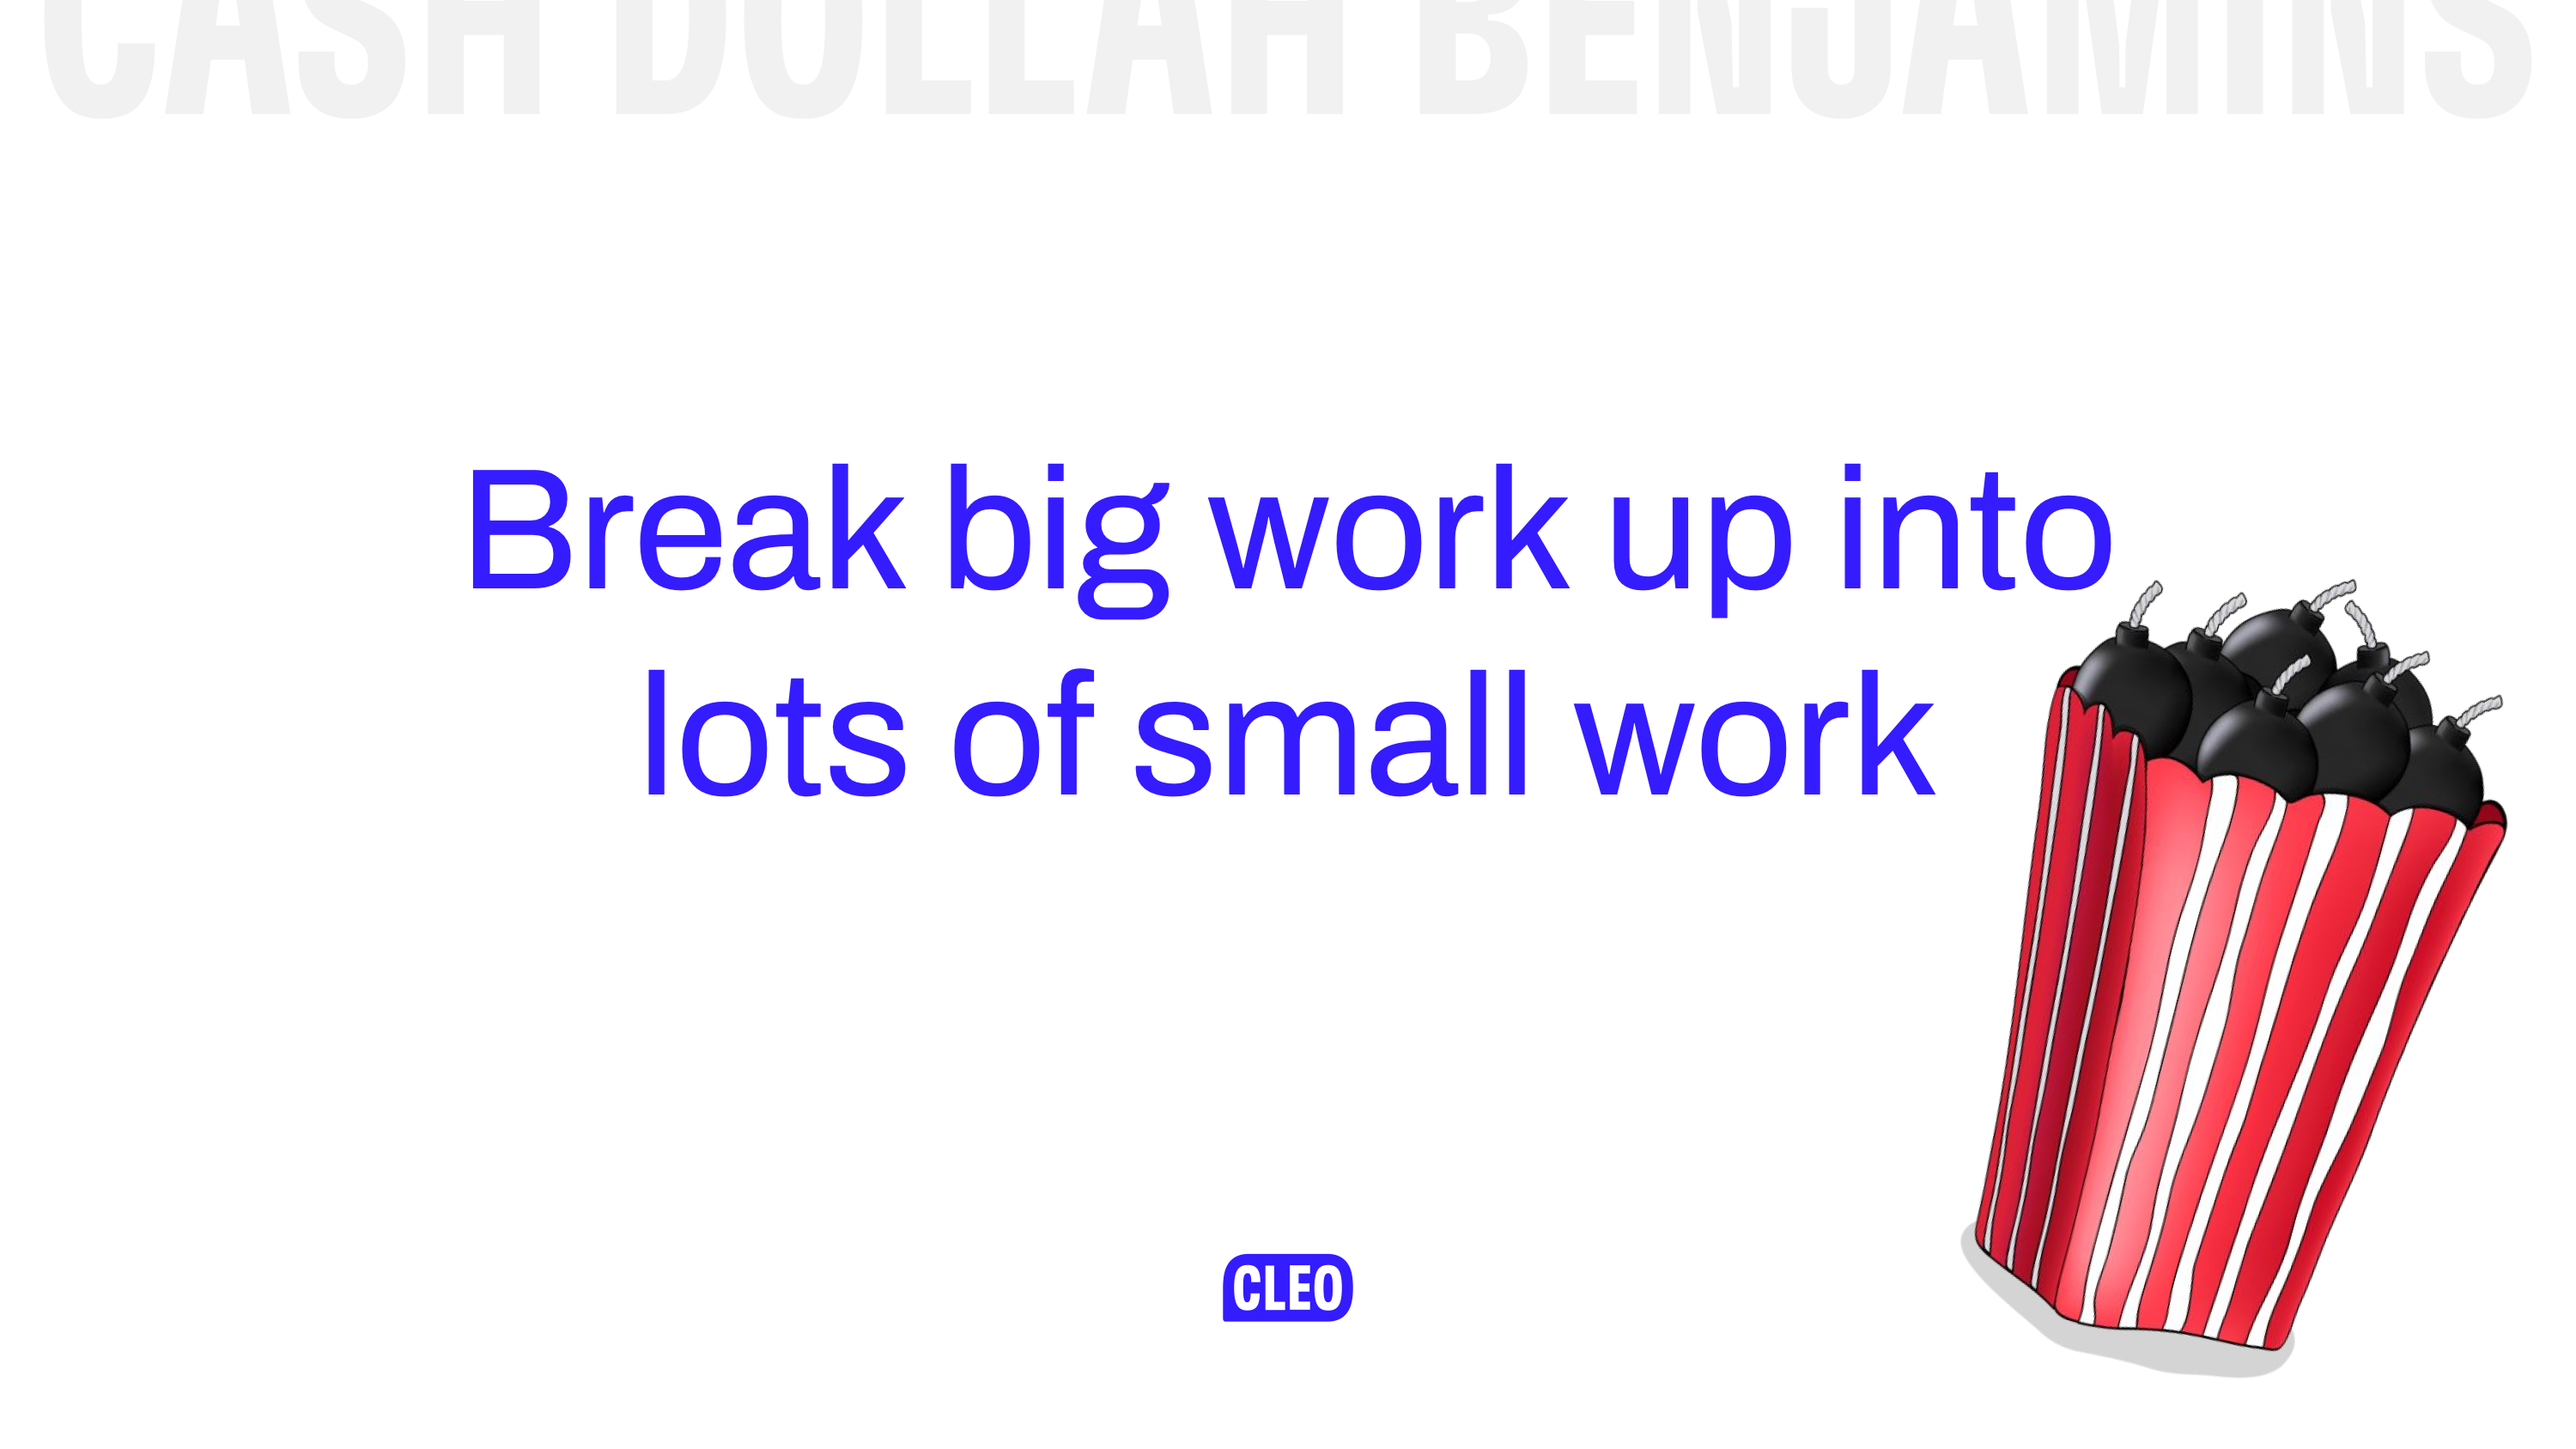 Break big work up into lots of small work - by way of visual representation there is a red & white paper popcorn bag, but it is full of bombs; text: Break big work up into lots of small work